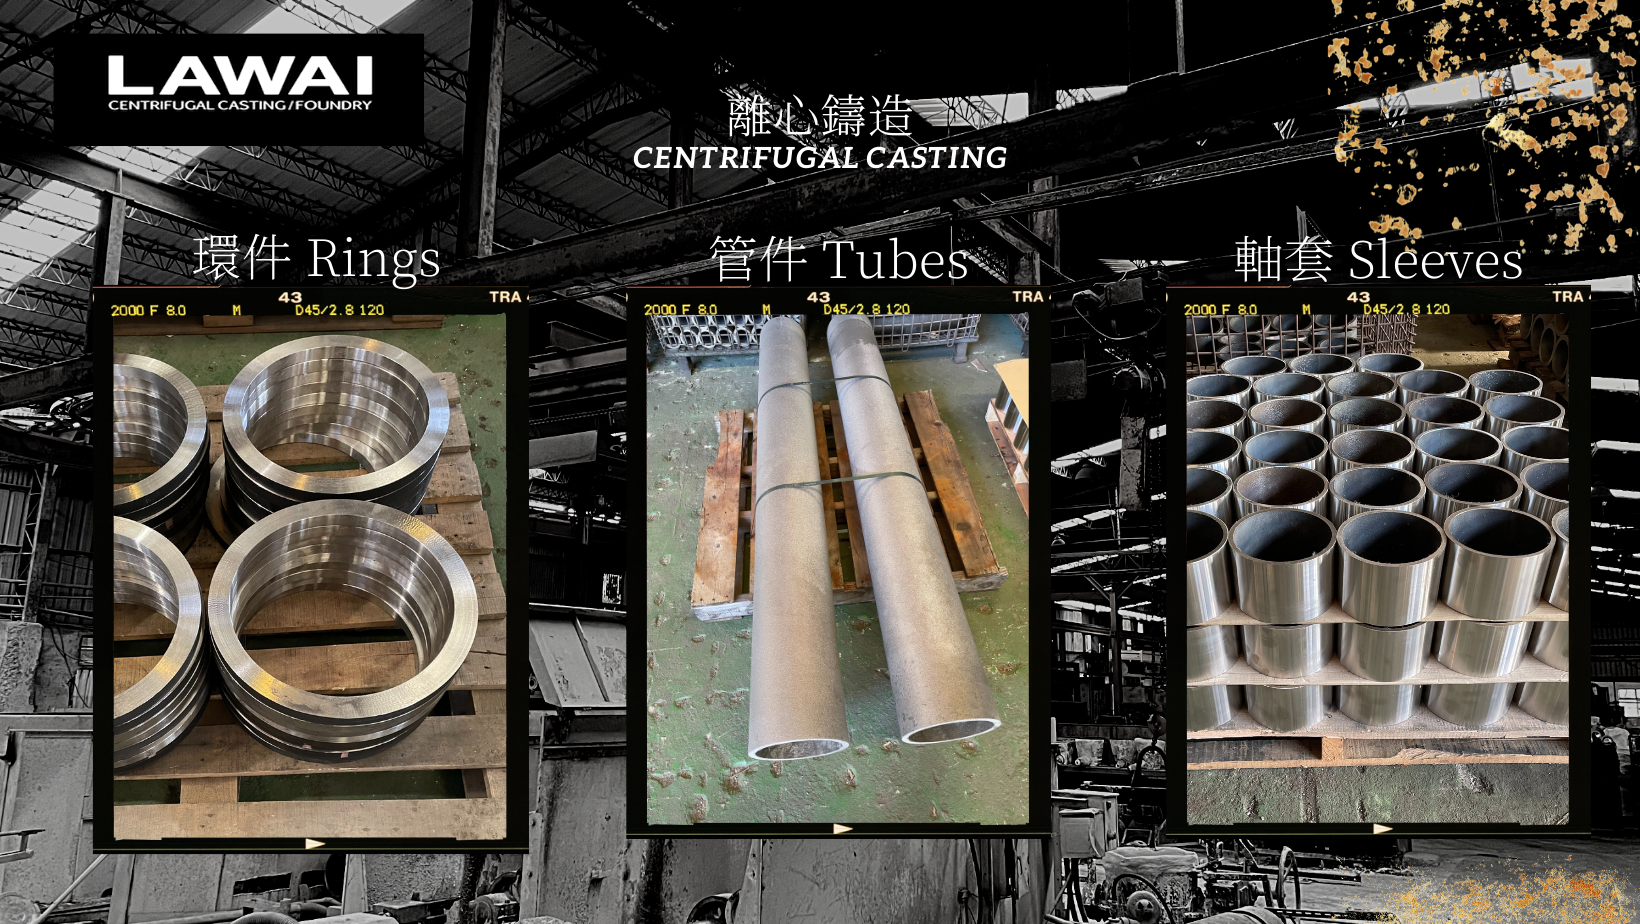 LAWAI's centrifugal casting based on stainless steel and special steel